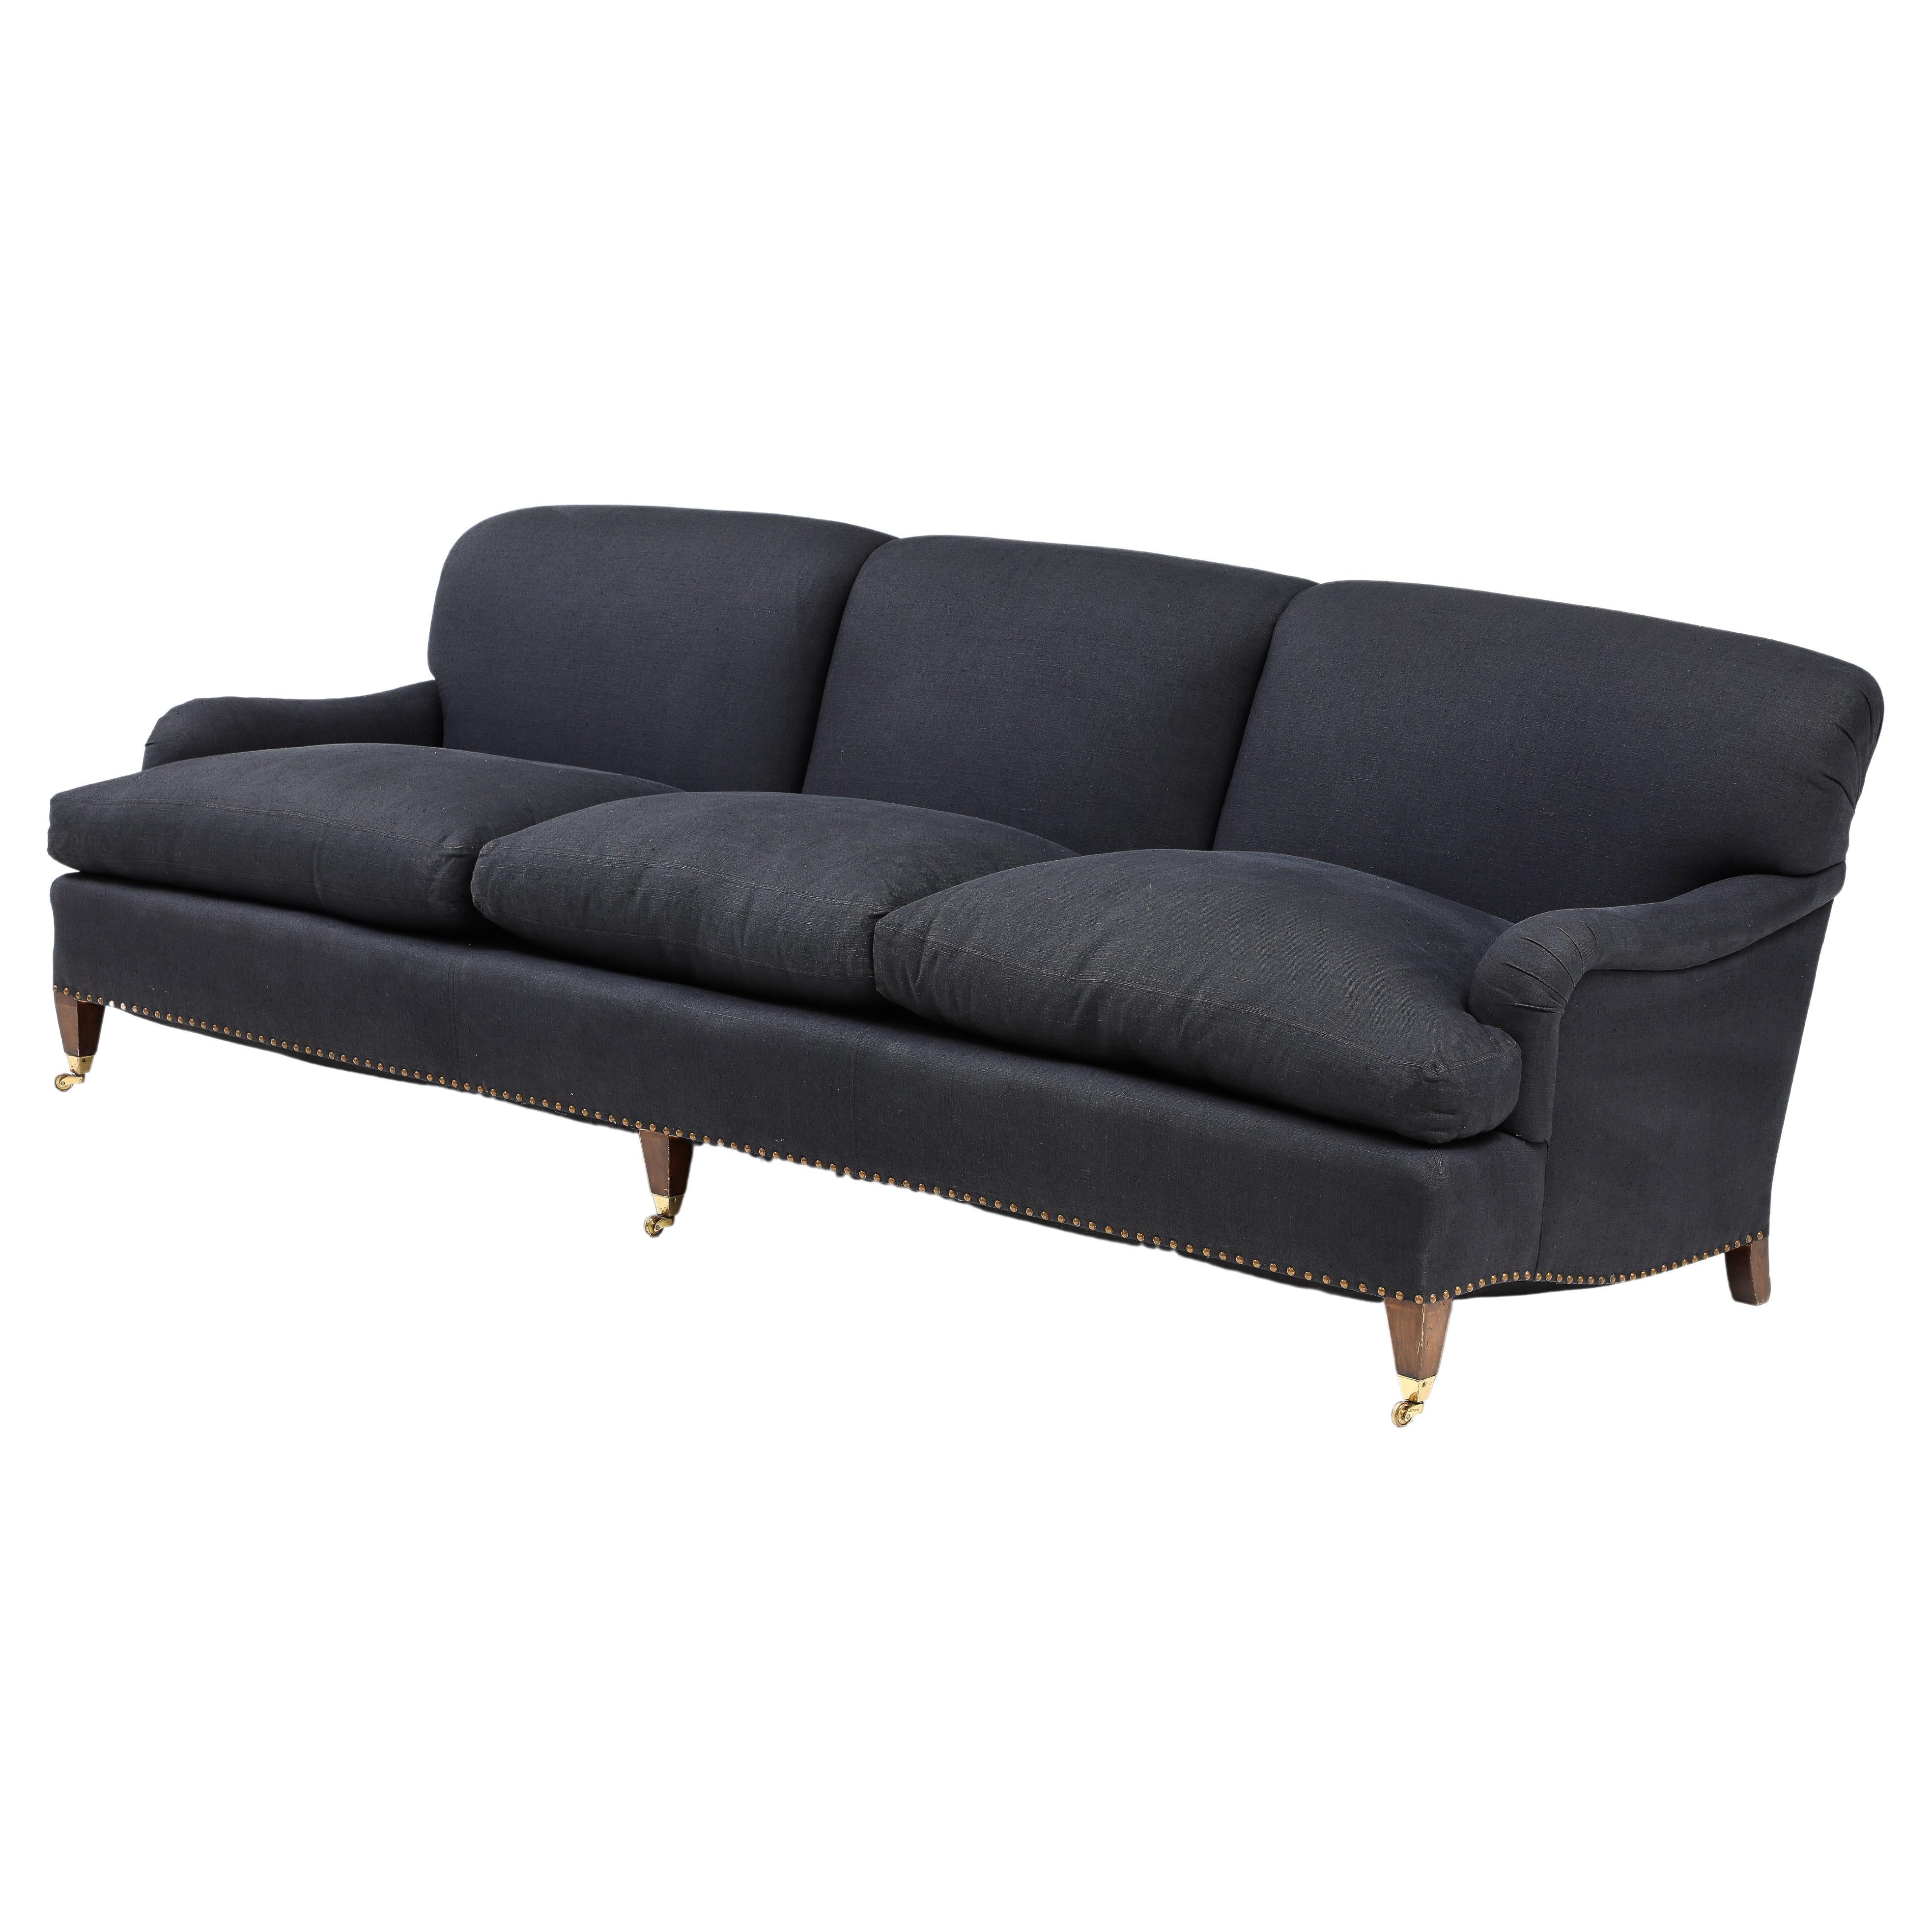 Jonas Upholstery Custom "Rutherford" Roll-Arm Sofa, United States, c. 1990 For Sale